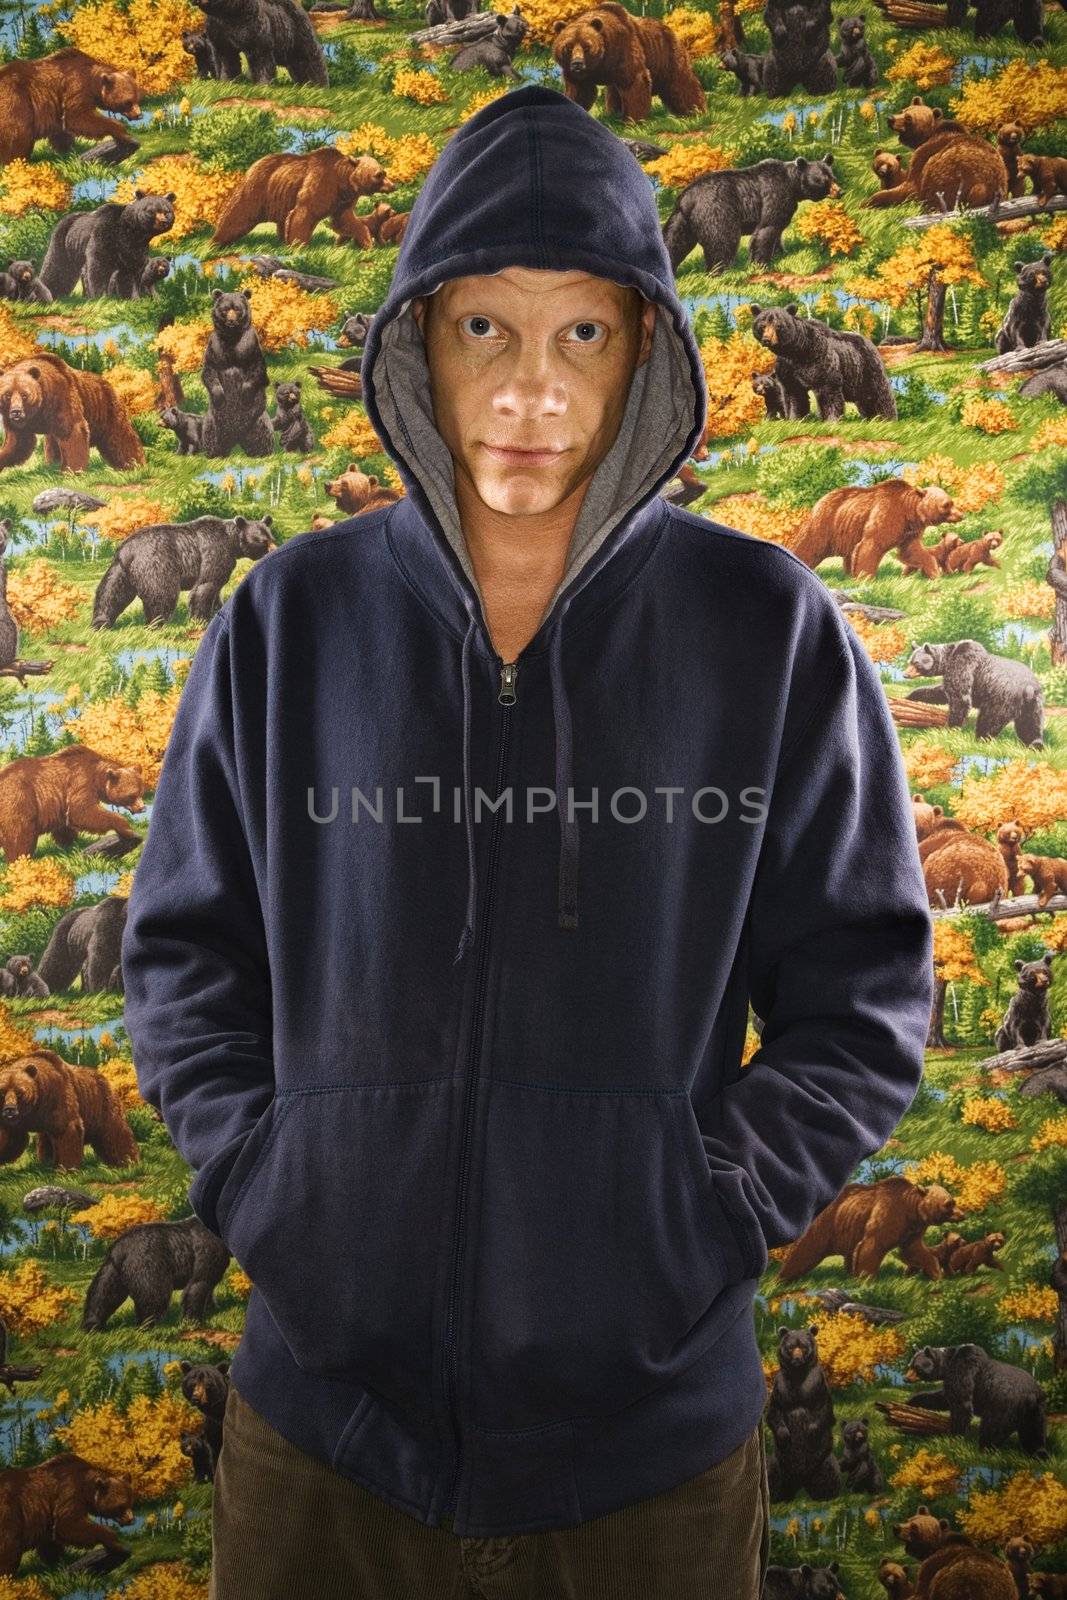 Portrait of a Mid-adult Caucasian male wearing a hoodie.